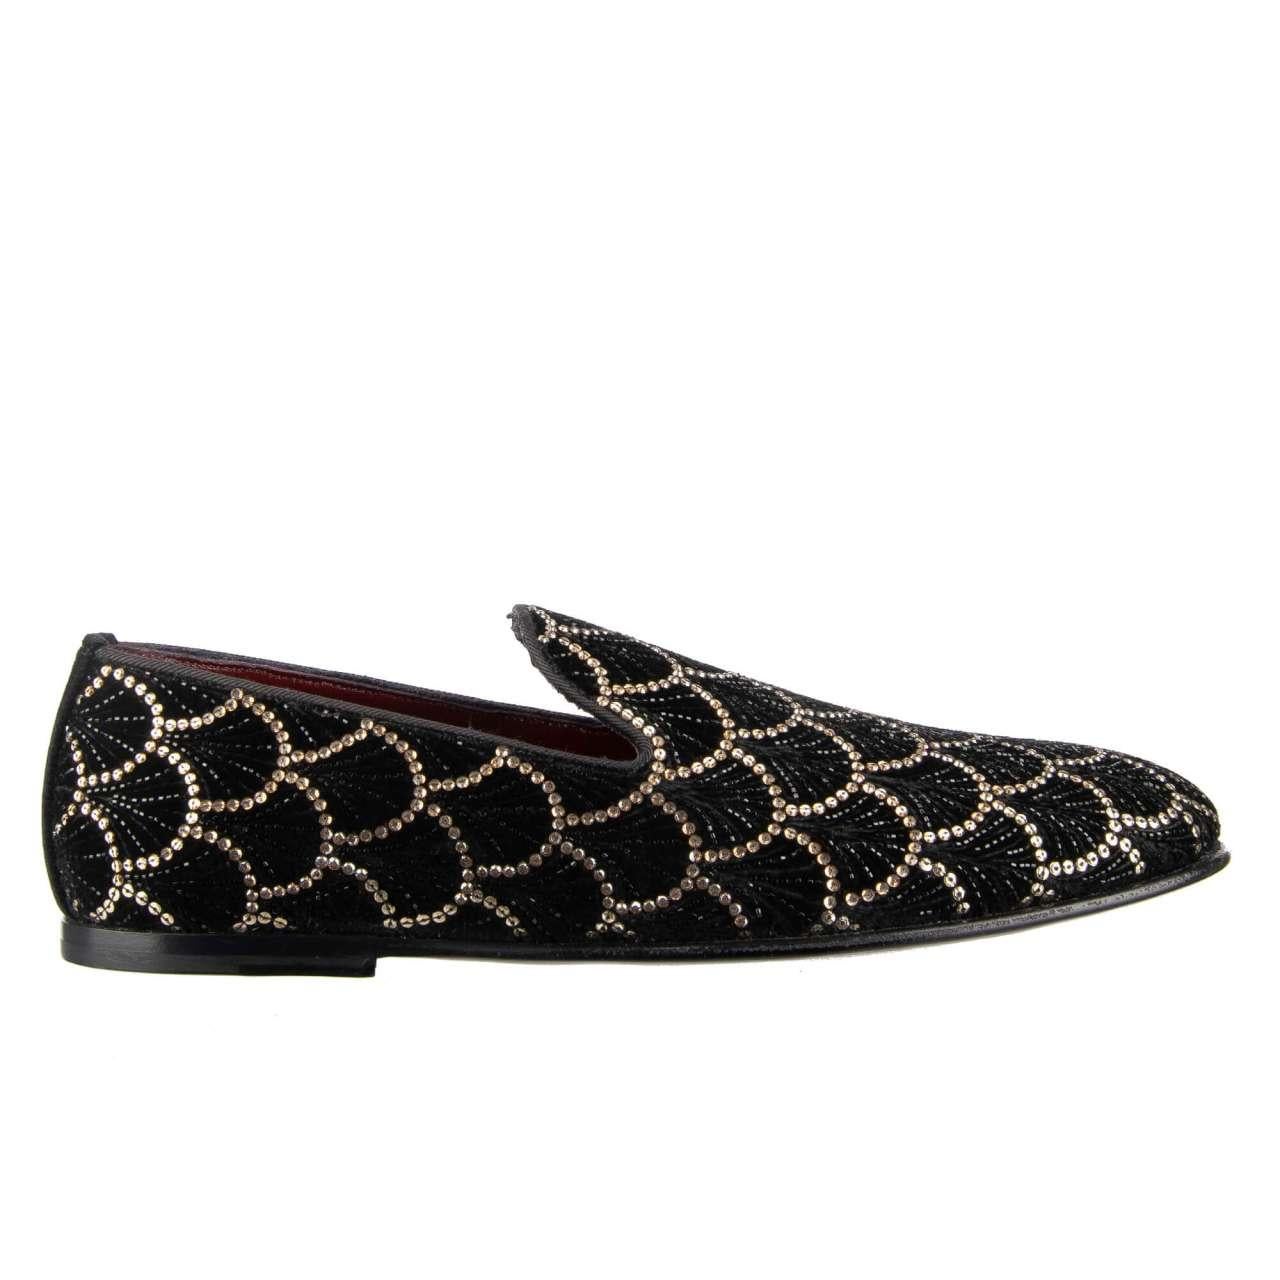 - Black and gold crystals embroidered loafer shoes ISPICA made of cotton by DOLCE & GABBANA - MADE IN ITALY - Former RRP: EUR 4.550 - New with Box - Model: A50148-AN280-8I762 - Material: 100% Cotton - Sole: Leather - Color: Black / Gold - Gold and